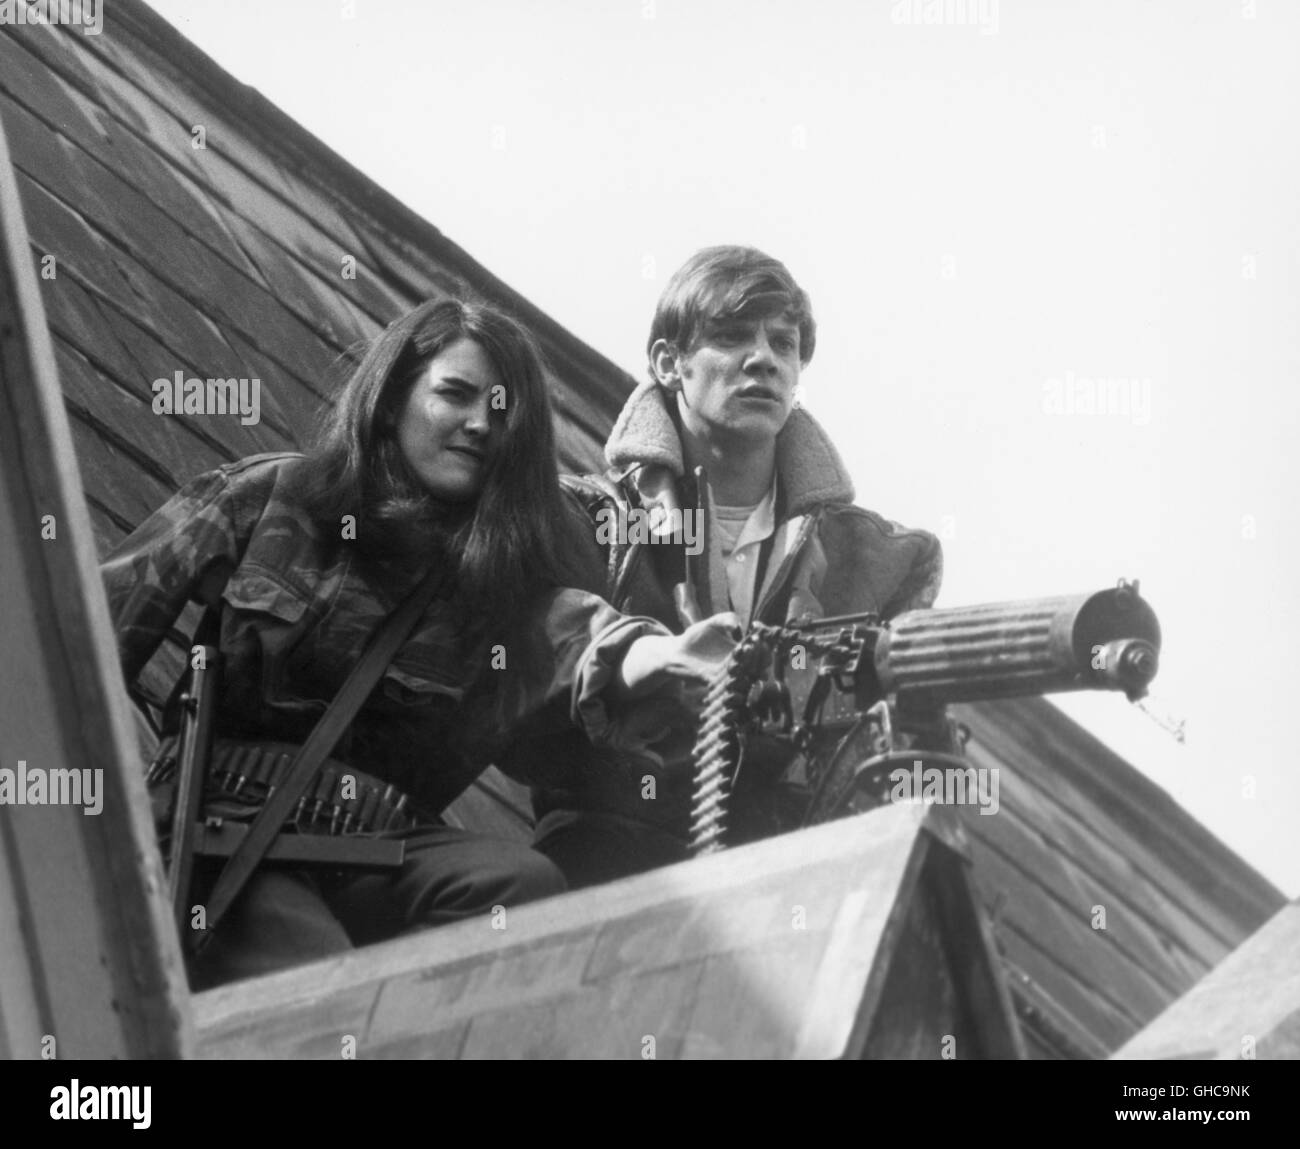 IF .... UK 1968 Lindsay Anderson The Girl (CHRISTINE NOONAN) and Mick (MALCOLM MCDOWELL) with machine gun. Regie: Lindsay Anderson Stock Photo